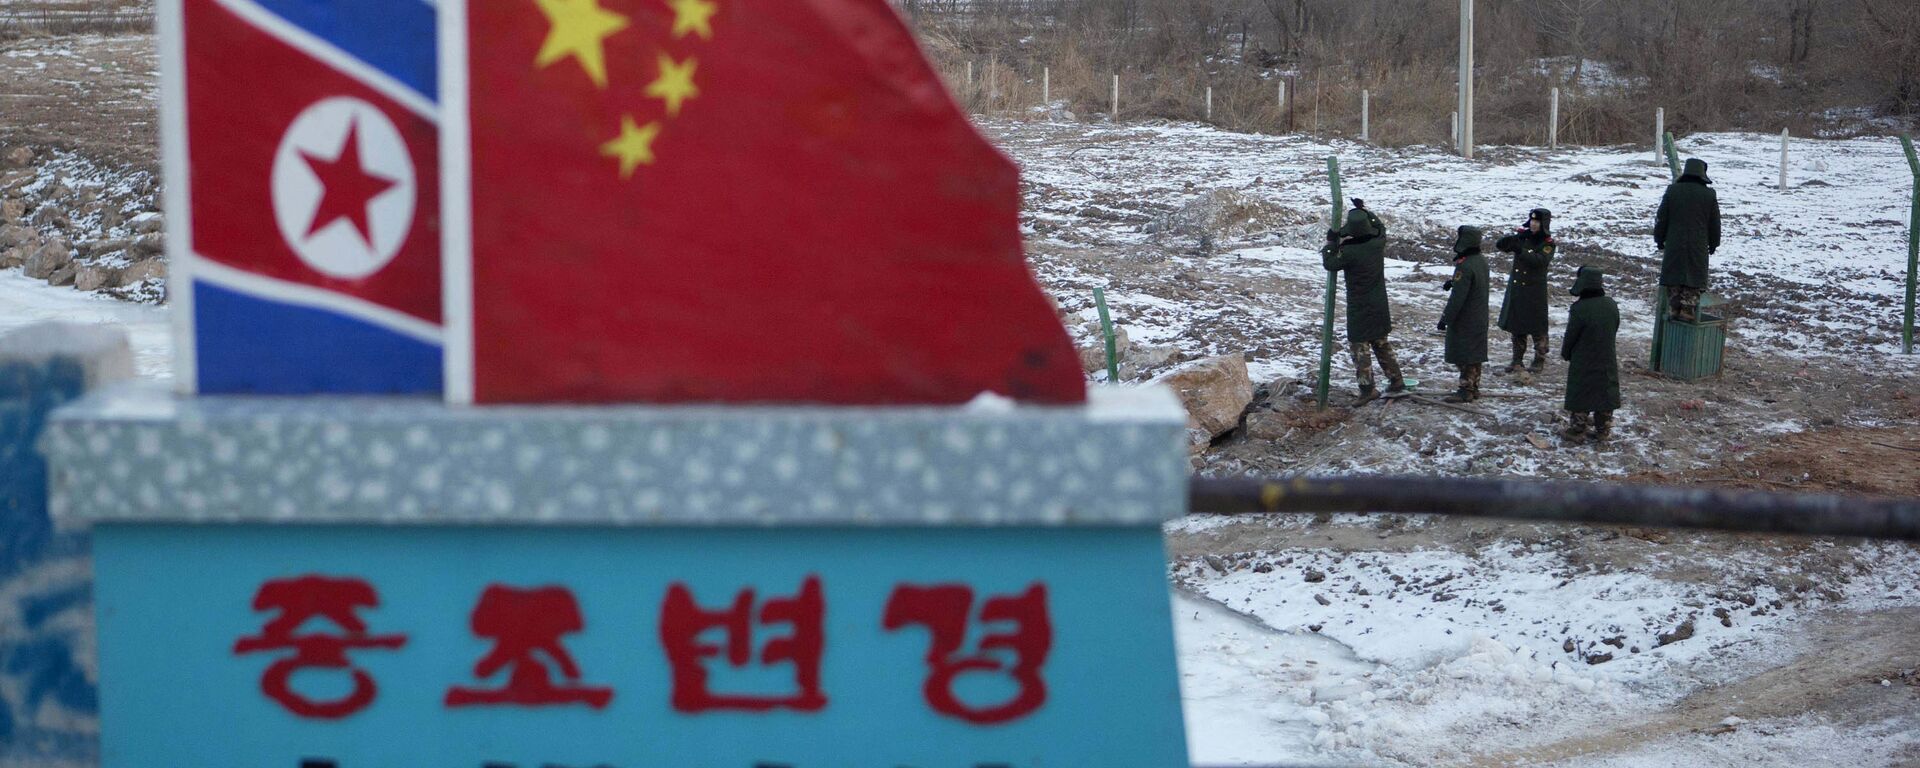 Concrete marker depicting the North Korean and Chinese national flags - 俄羅斯衛星通訊社, 1920, 28.01.2021